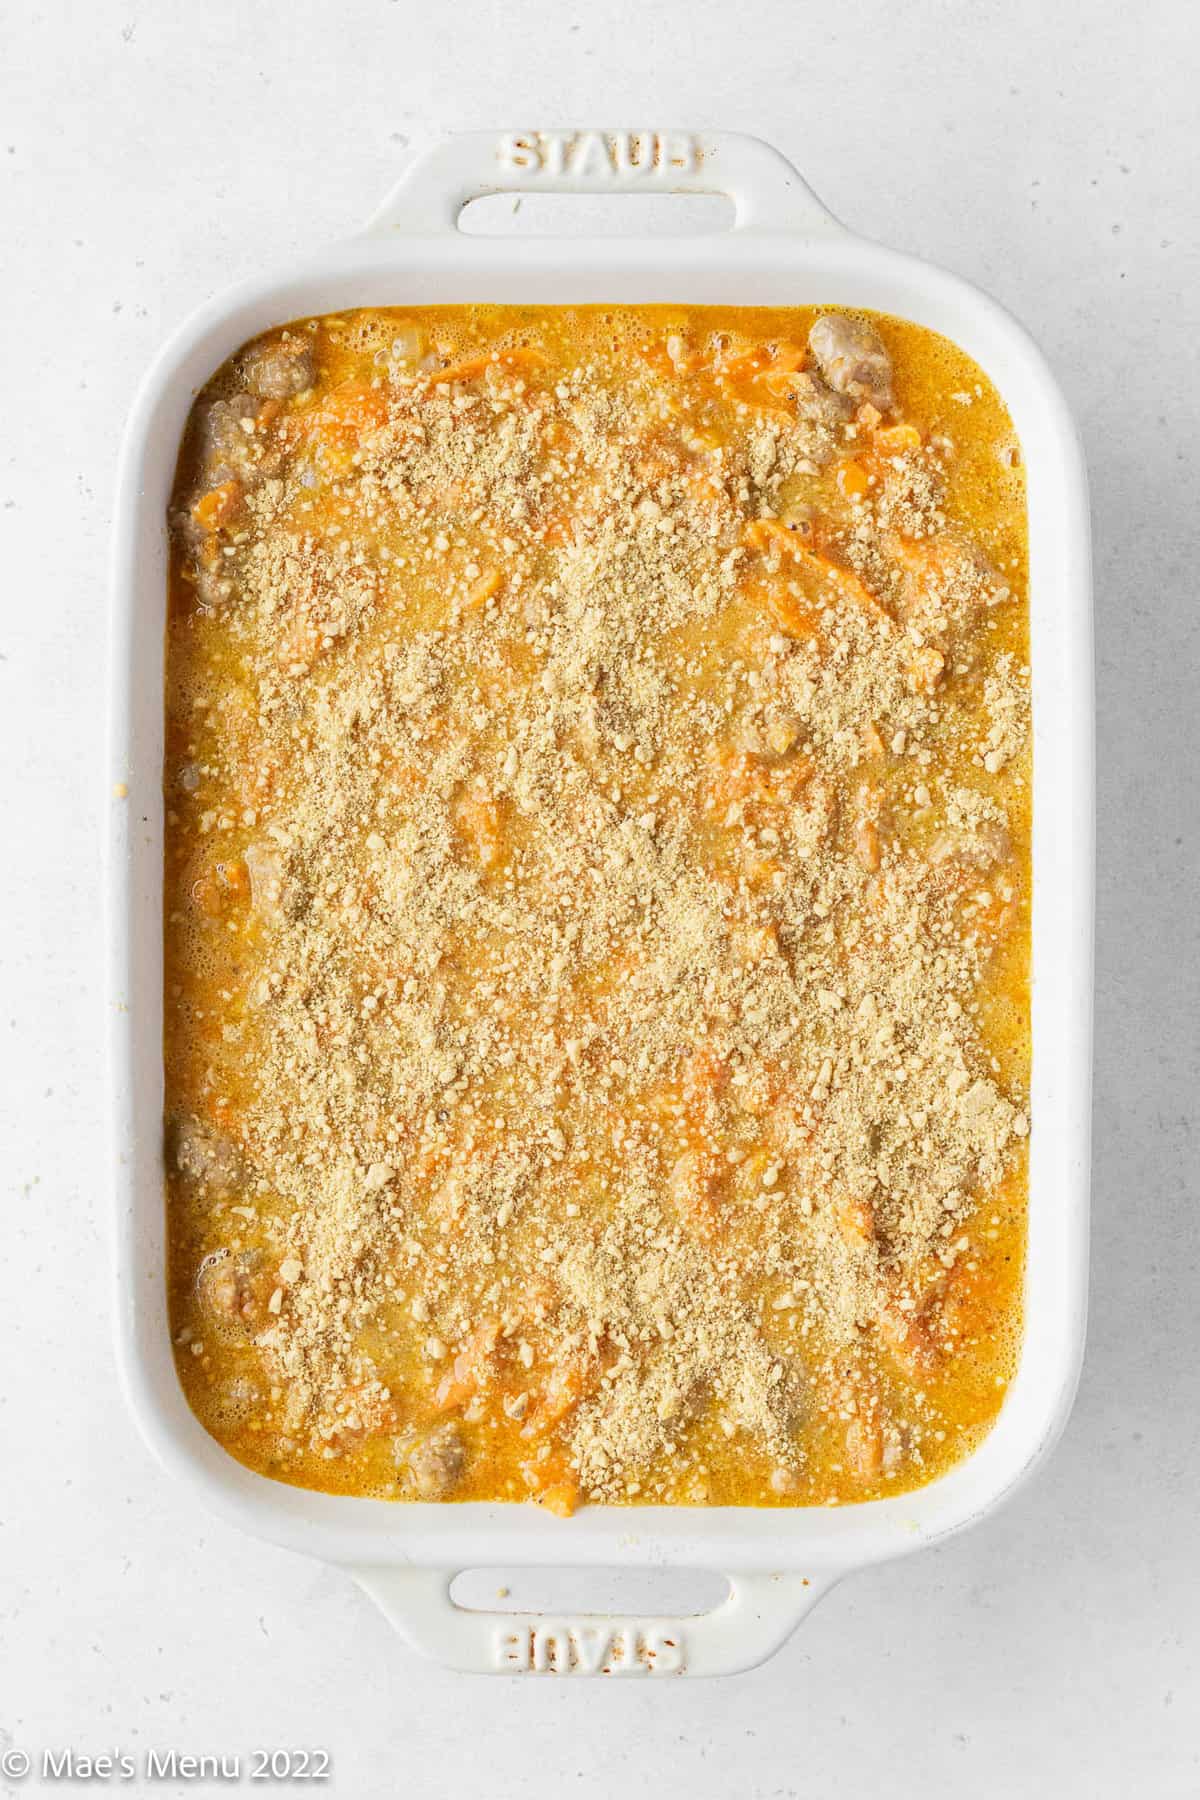 The dairy-free casserole in a pan before going into the oven.